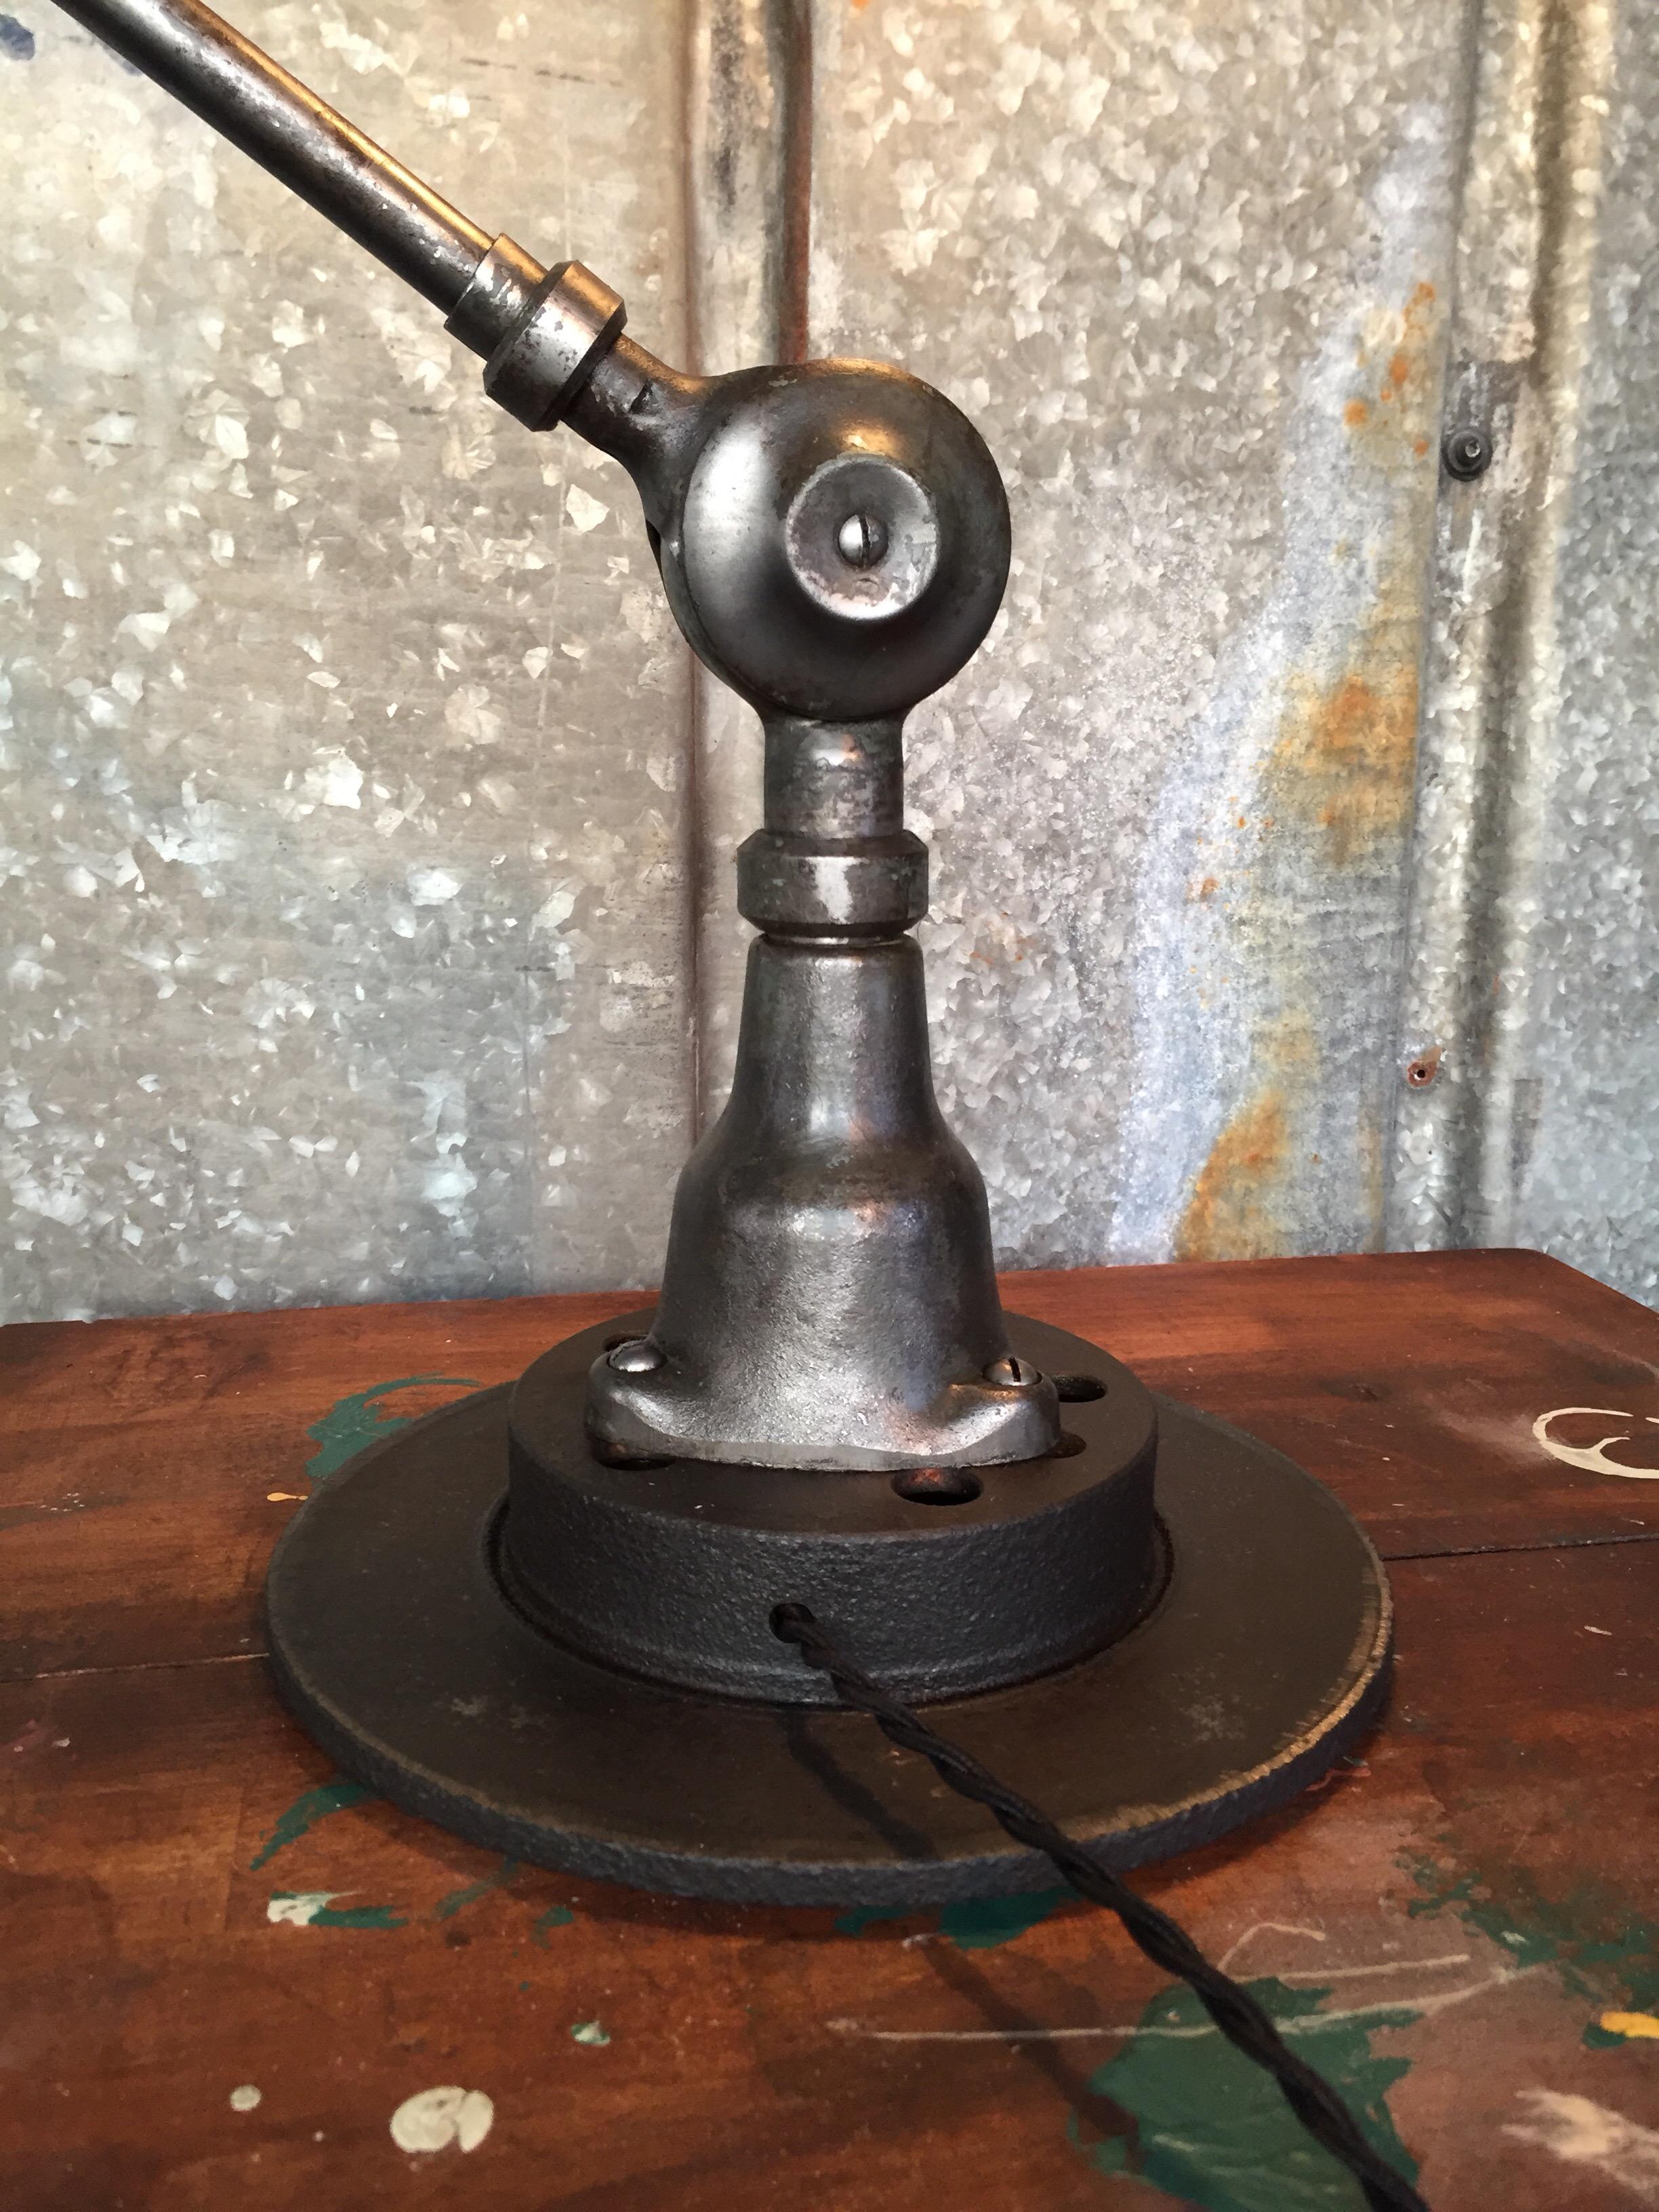 Triplex industrial table/floor/wall lamp designed by Johan Petter Johanson in the 1930s and made by ASEA of Sweden.
This iconic lamp is in original working condition with the original paint and with new wiring.
Gorgeous patina!
    